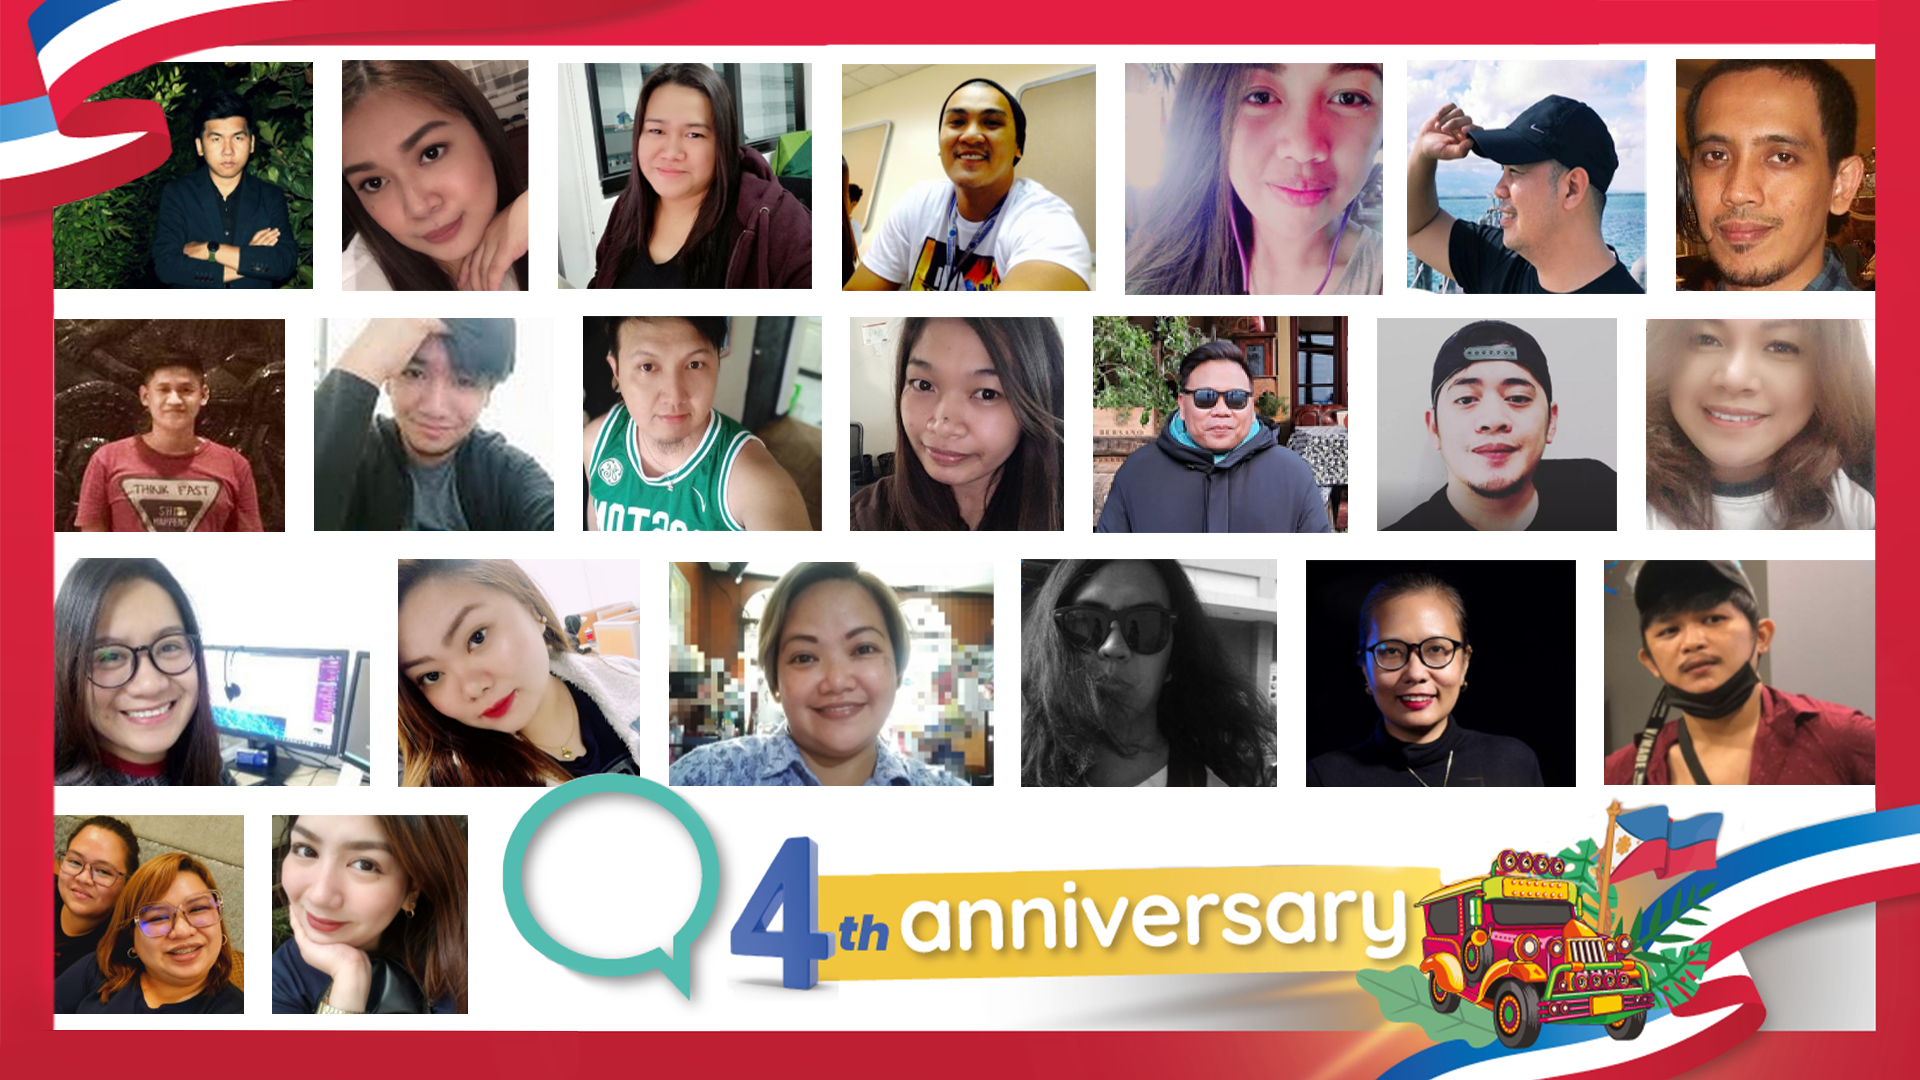 Our Philippines service delivery team is celebrating 4 years since it has been incorporated